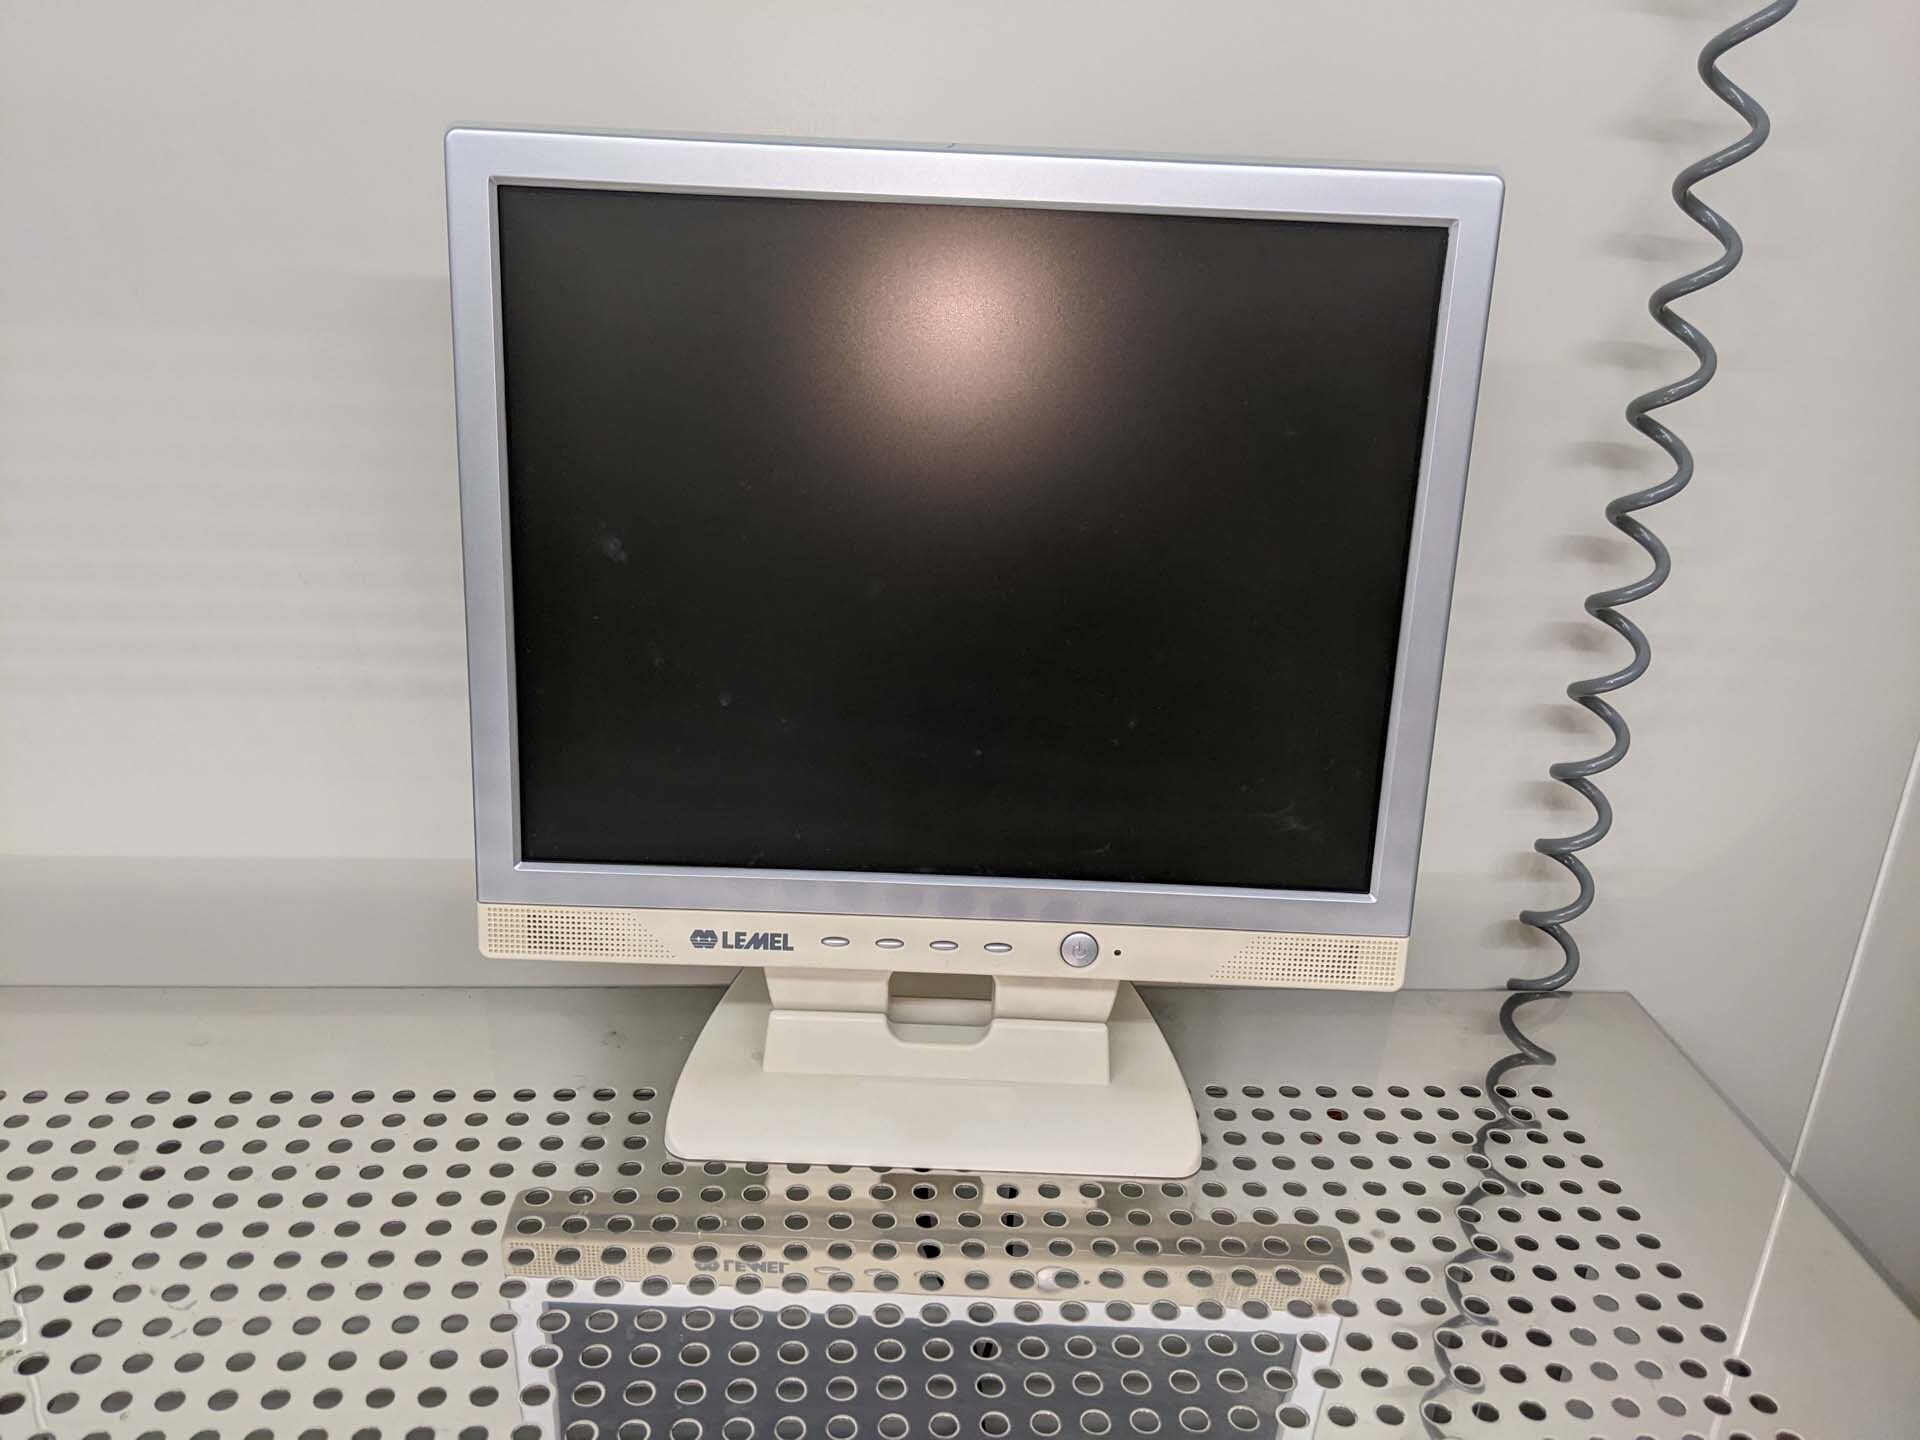 Photo Used BEDE QC200 For Sale